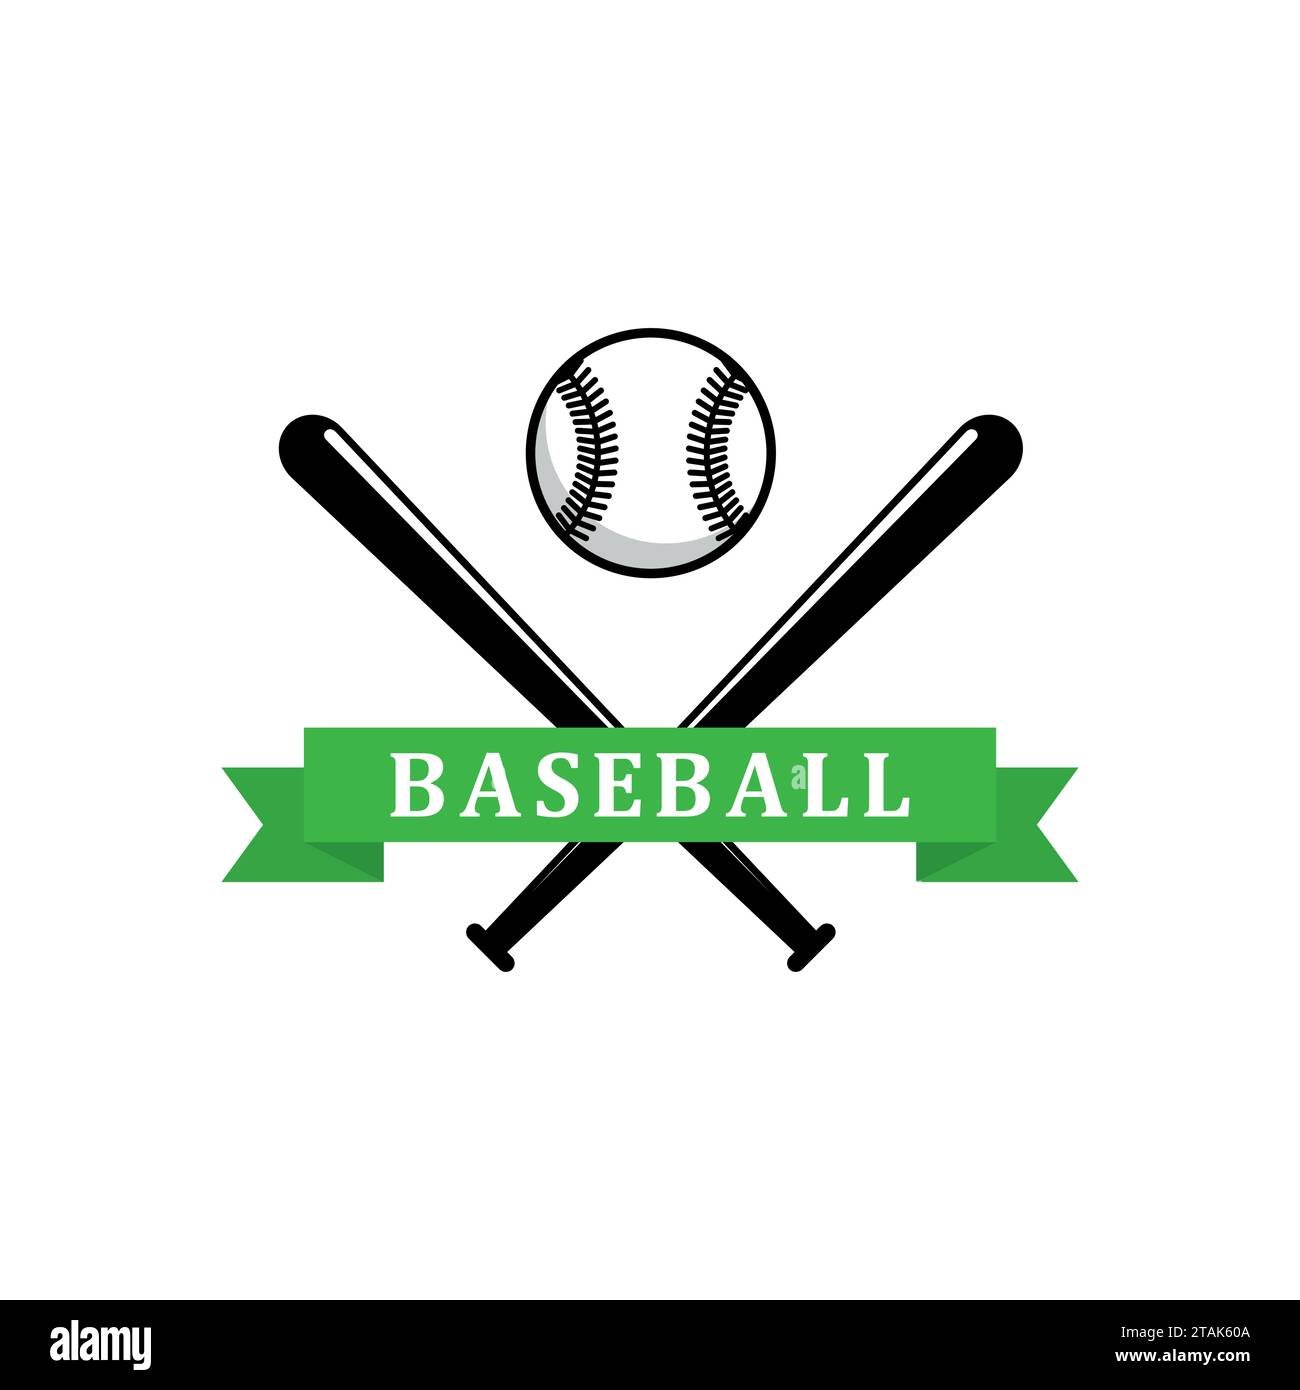 Baseball sporting emblem or badges with crossed bats Stock Vector